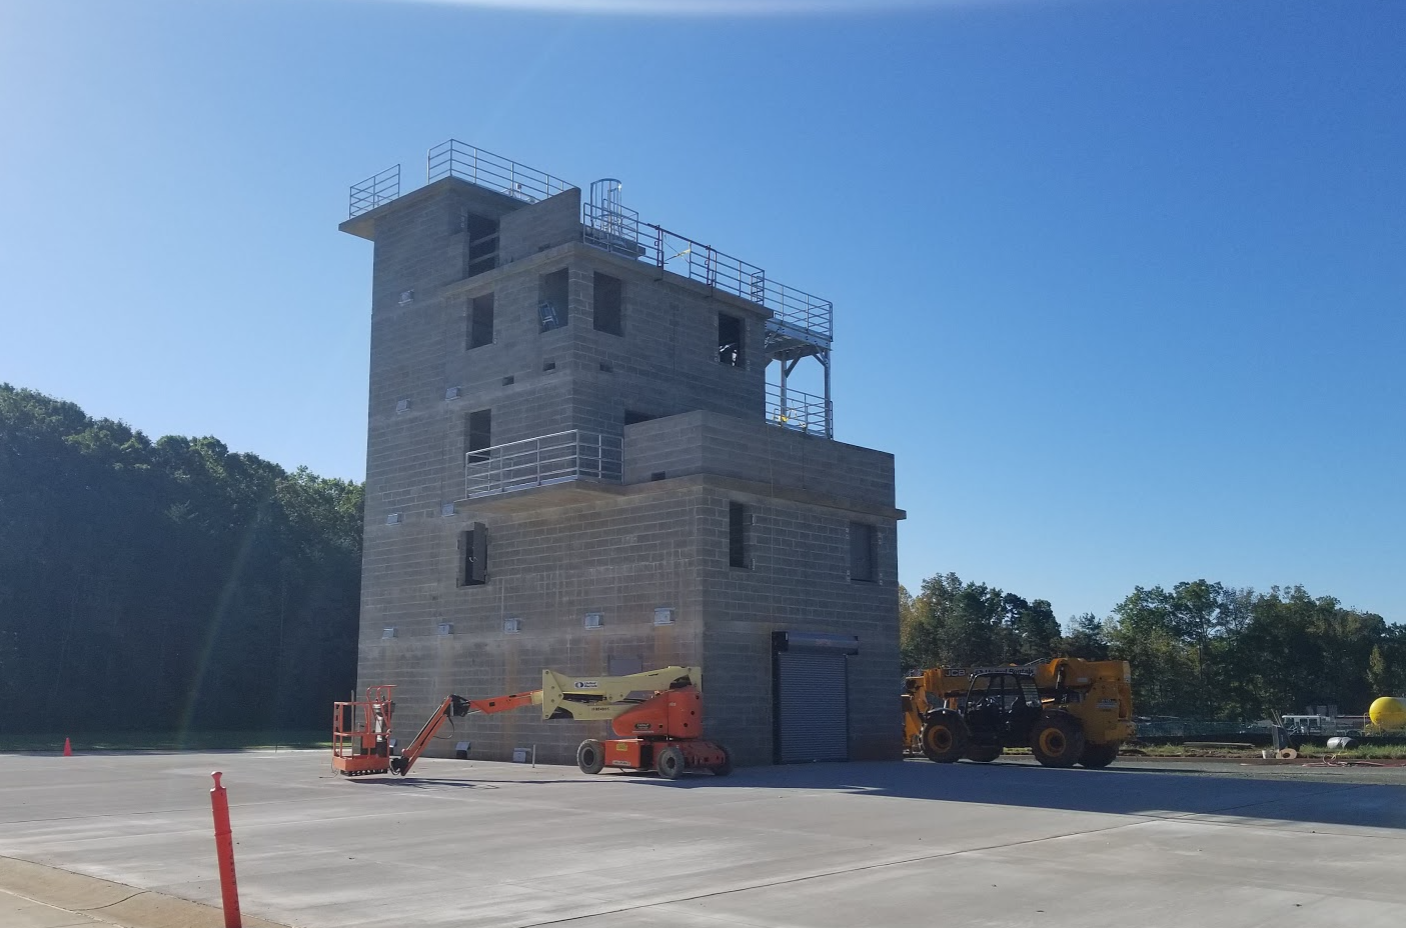 The Fire Training Tower nears completion.